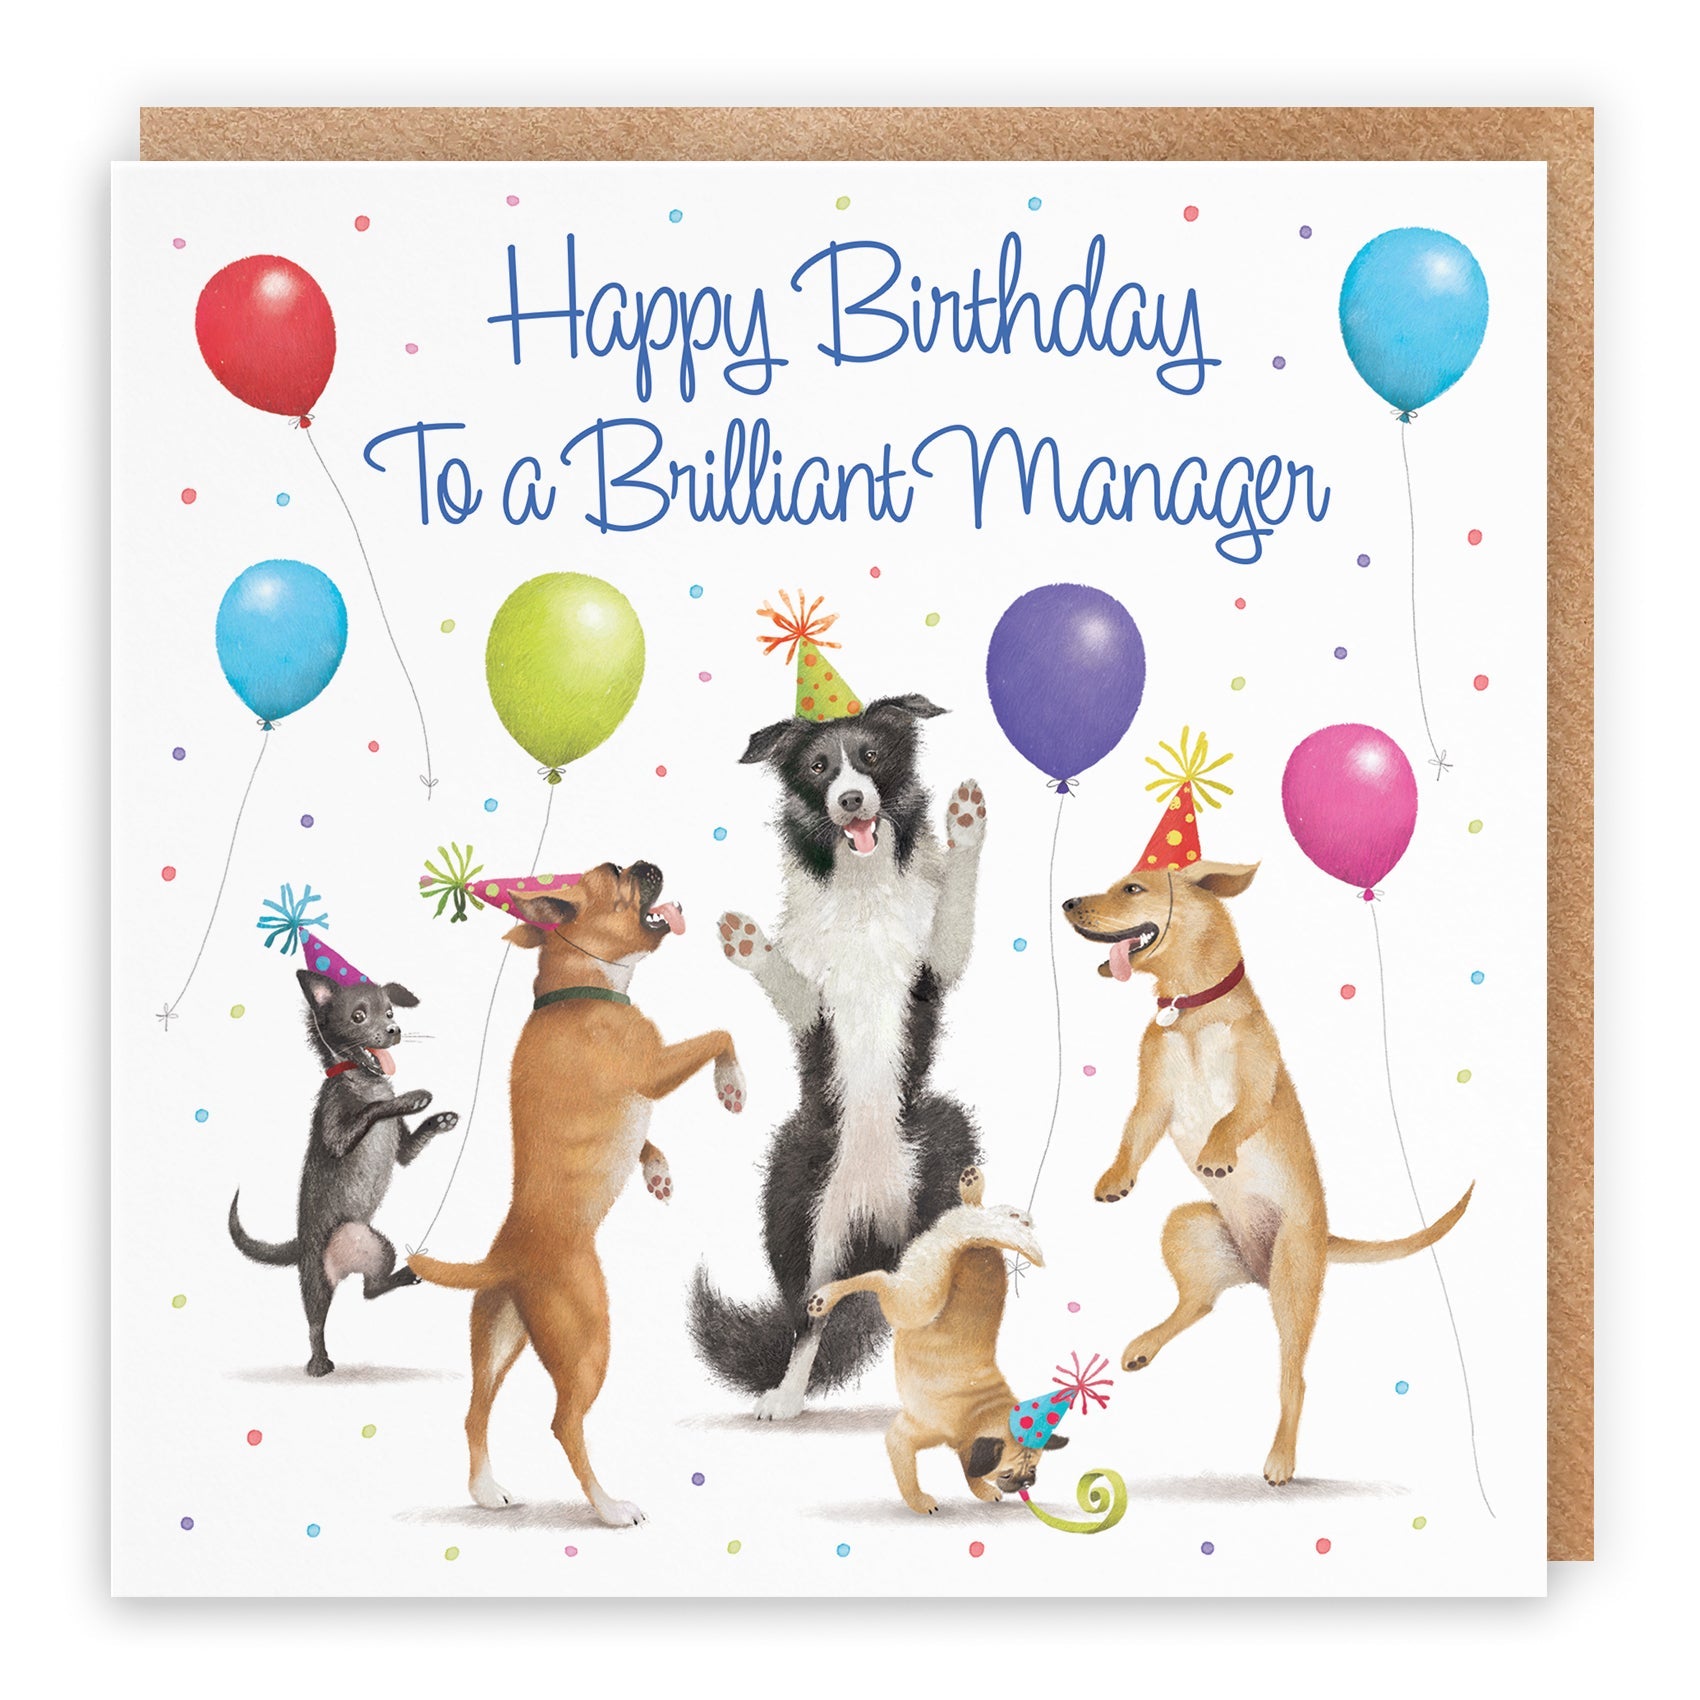 Manager Birthday Card - Dancing Dogs